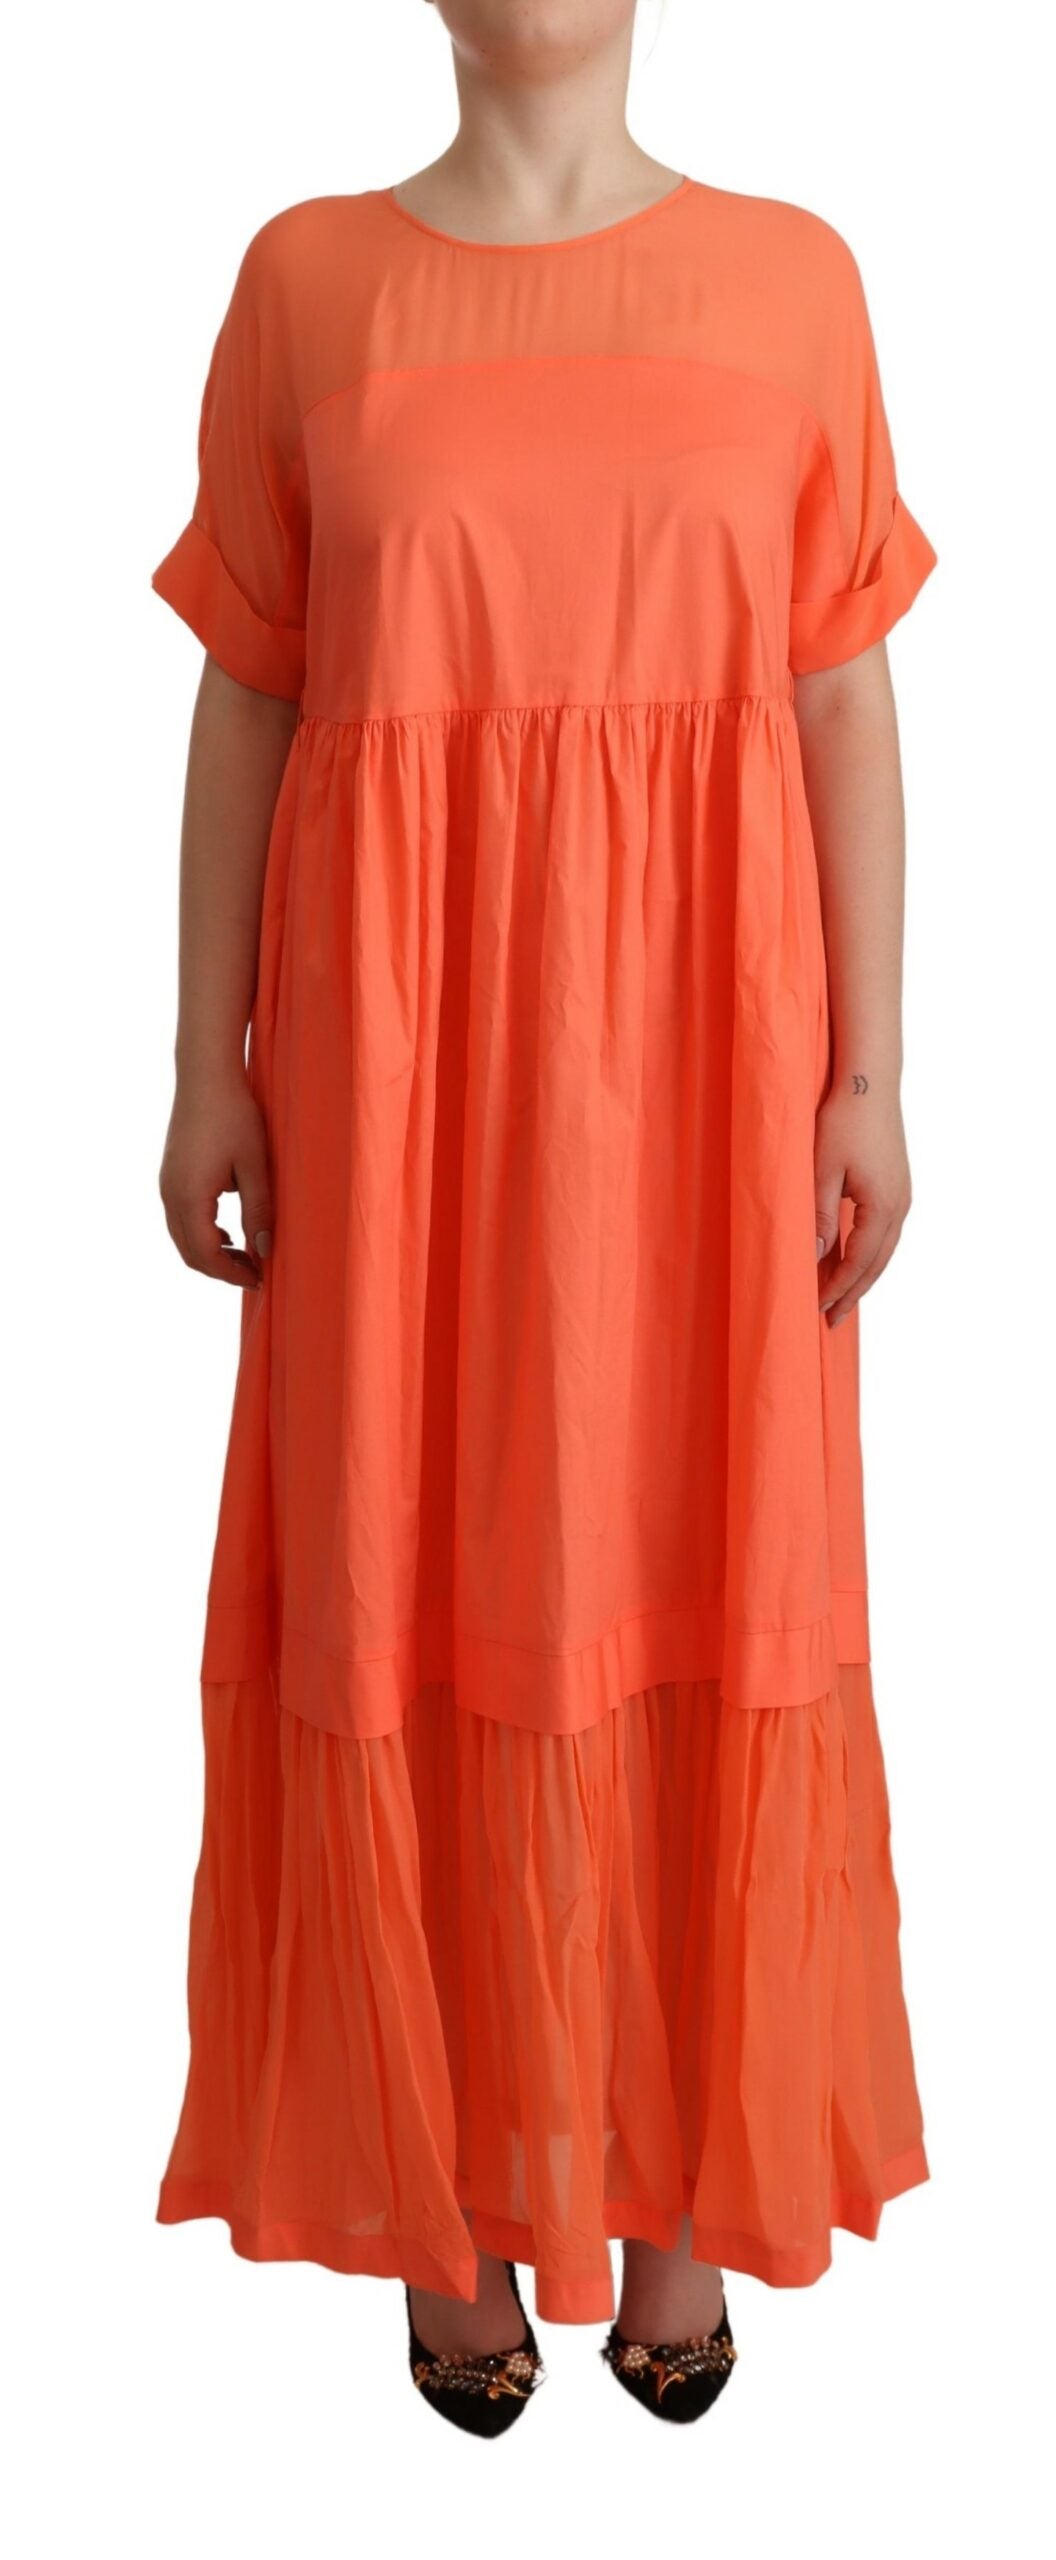 Elegant Coral Maxi Dress with Short Sleeves